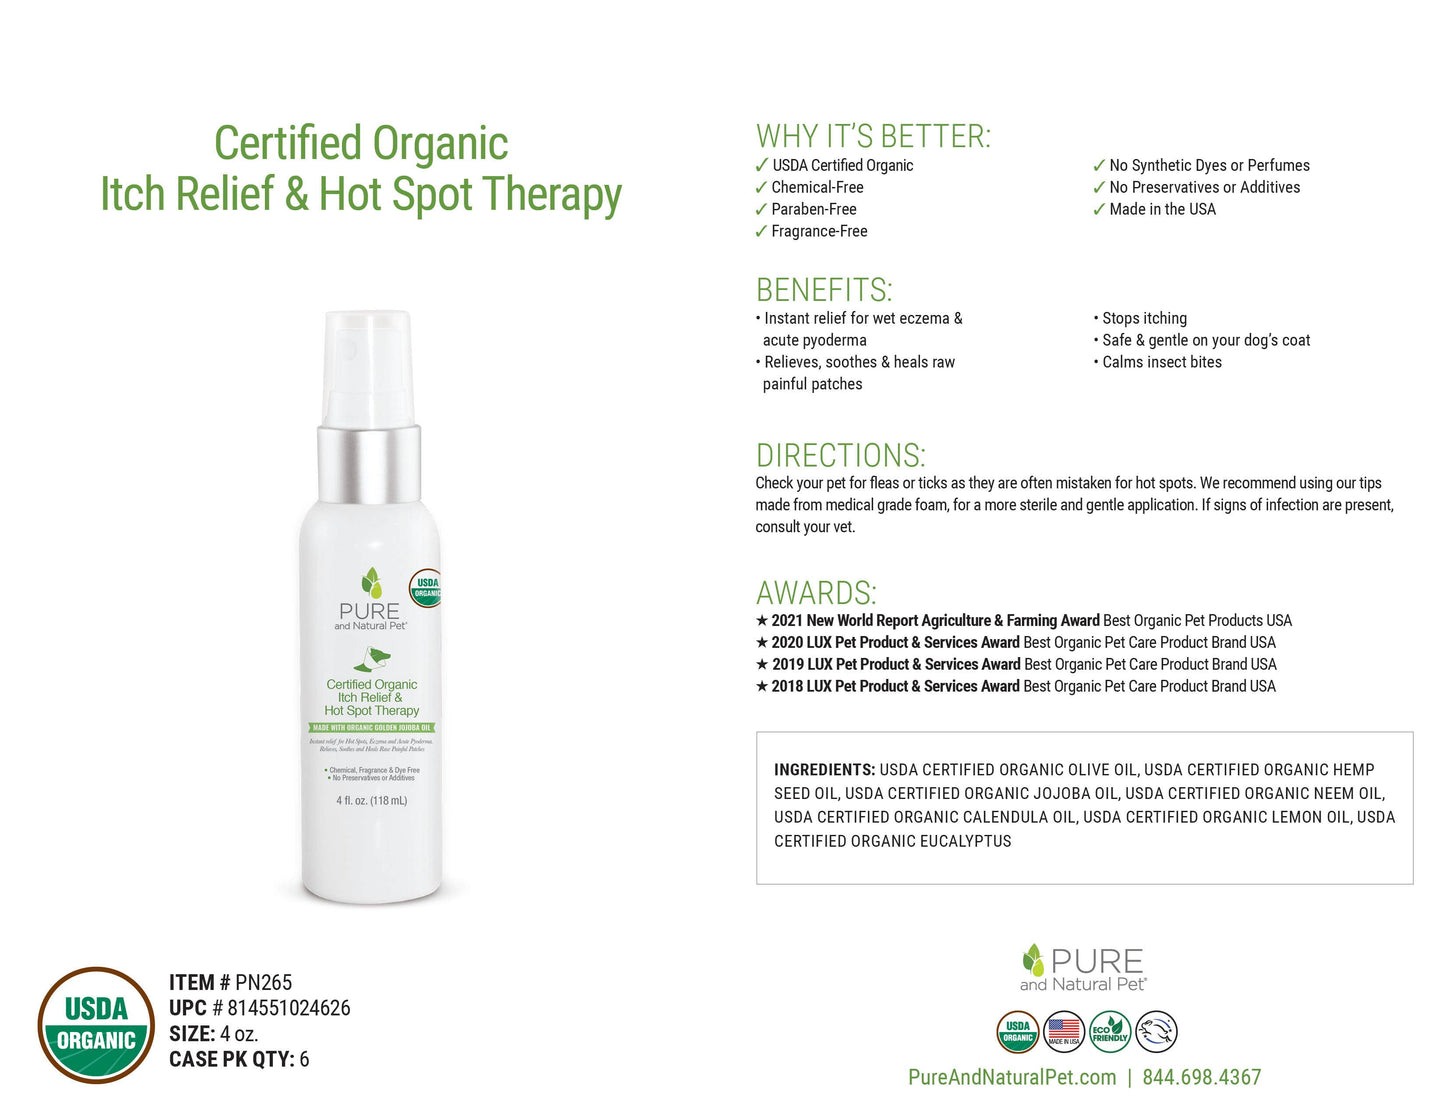 Pure and Natural Pet - USDA Certified Organic Itch Relief & Hot Spot Oil for Dogs  Image